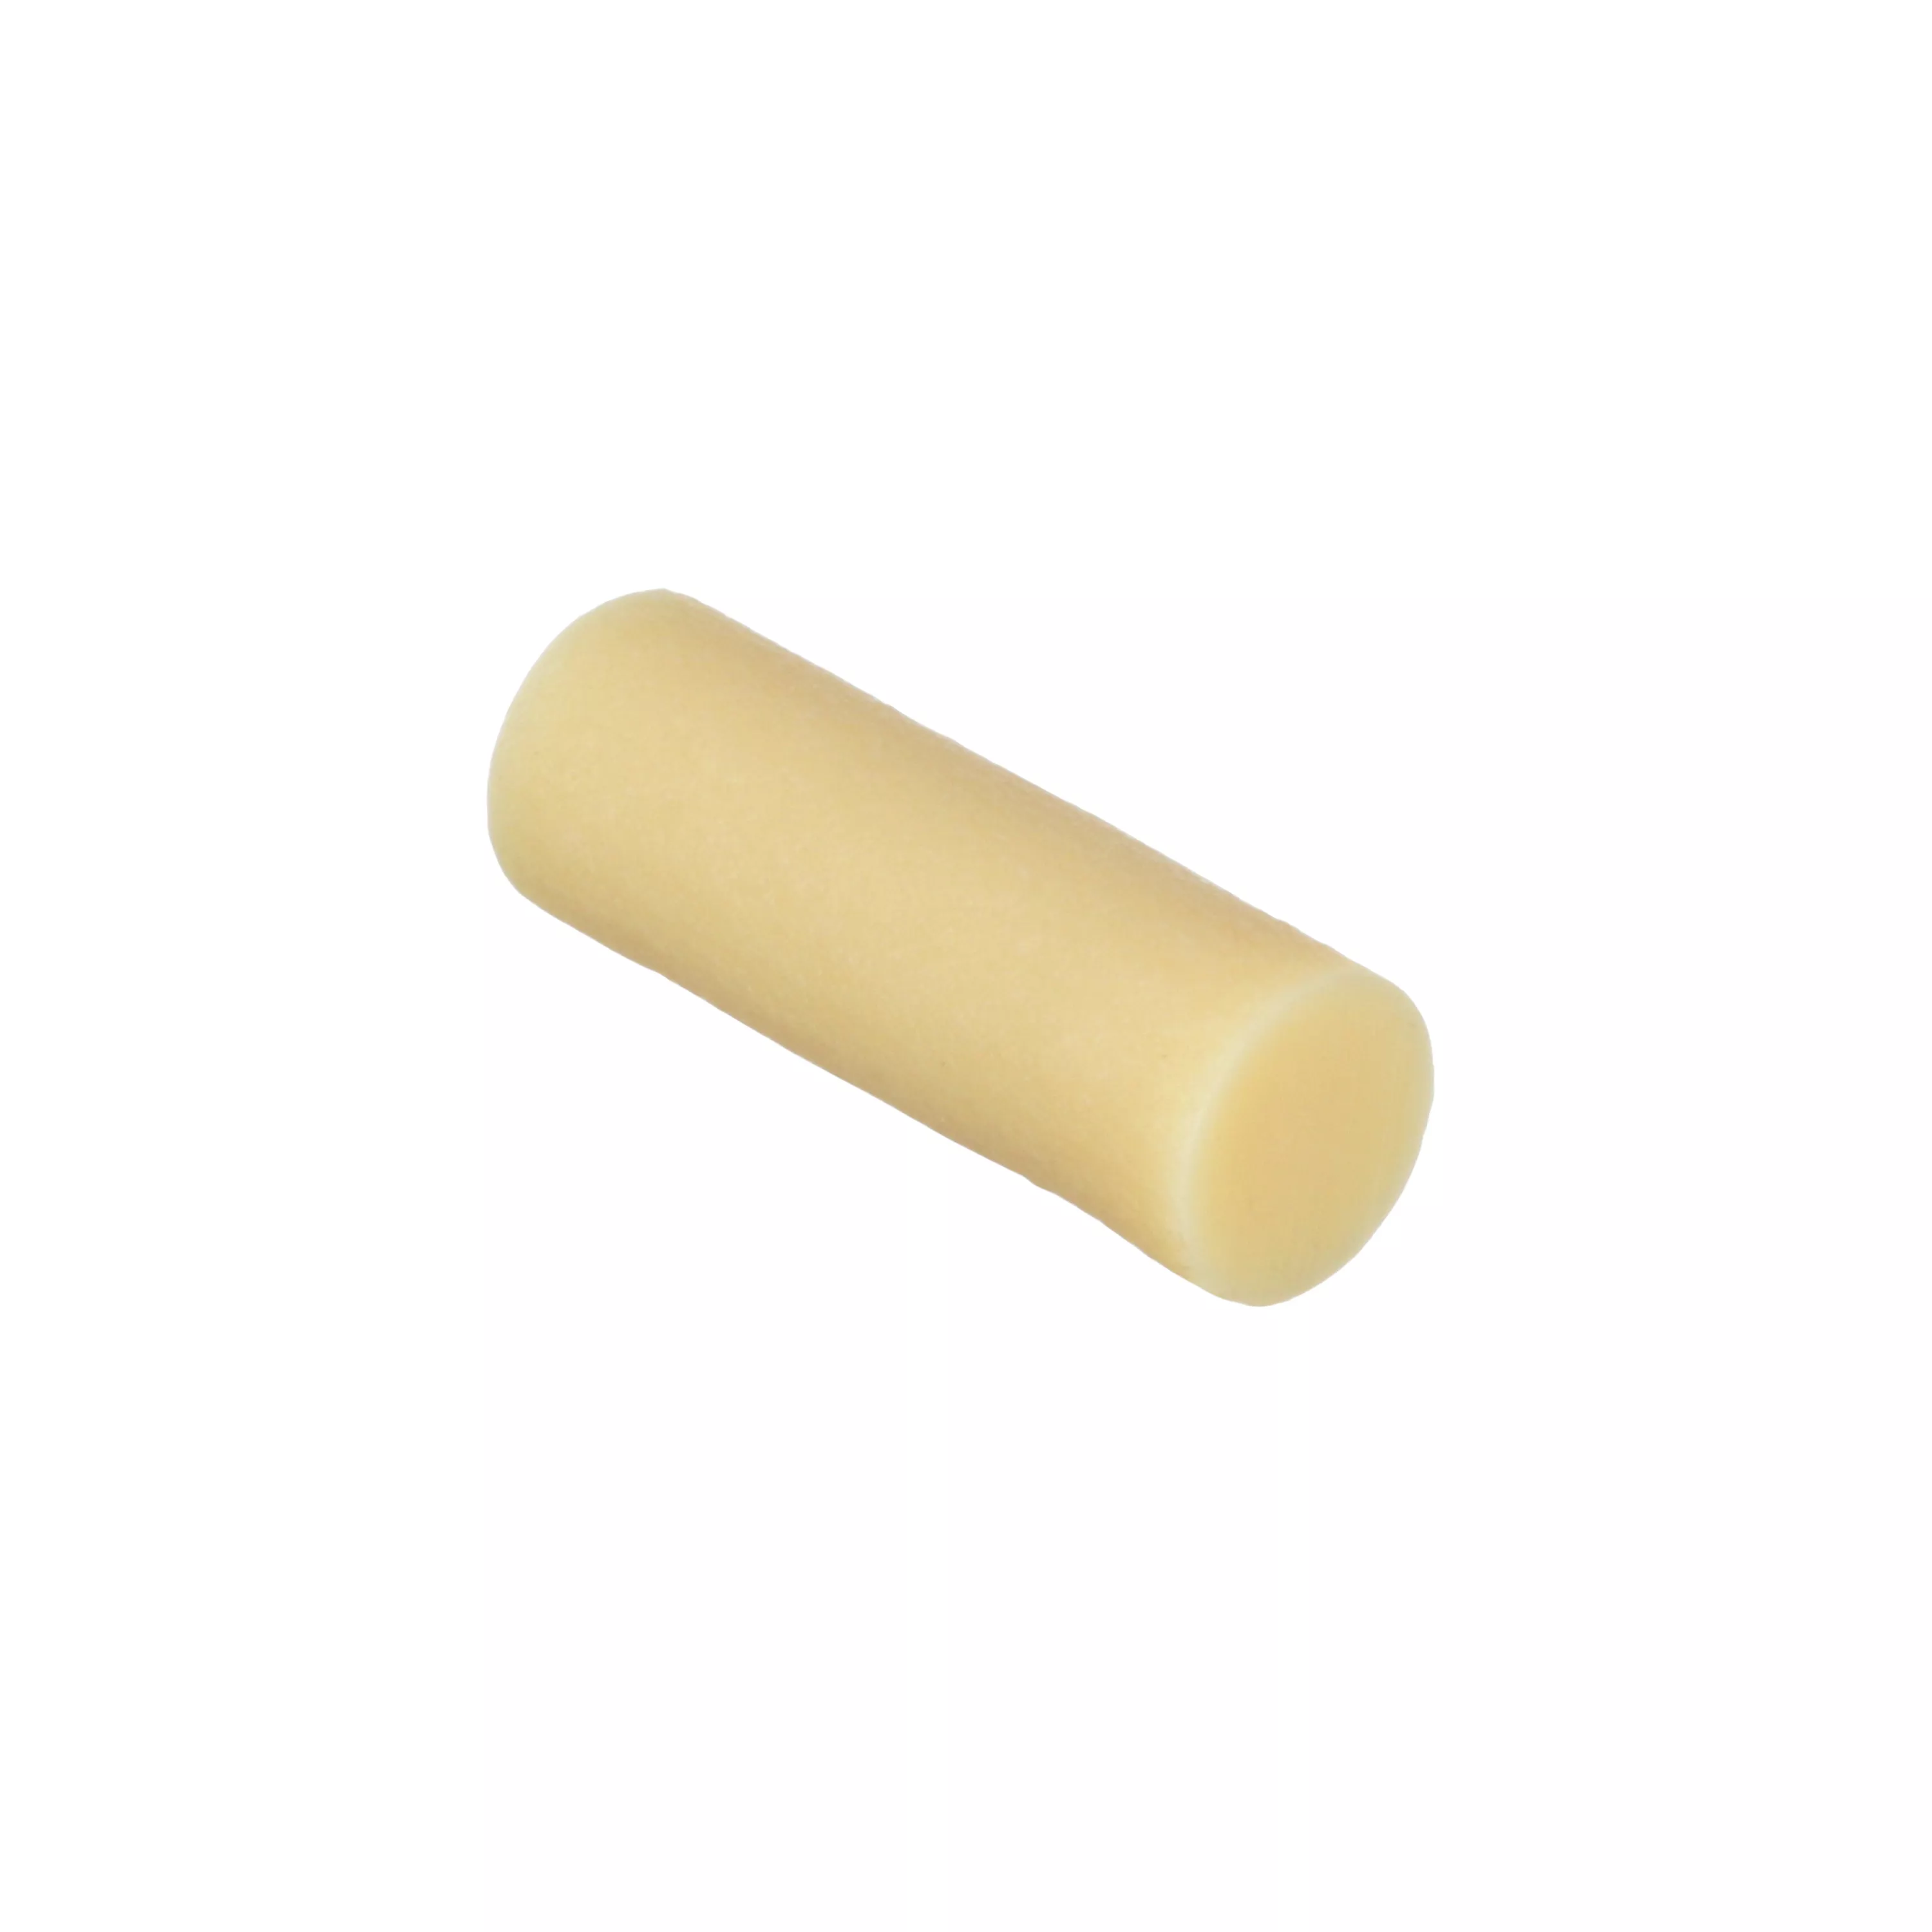 3M™ Hot Melt Adhesive 3731PG, Tan, 1 in x 3 in, 22 lb, Case